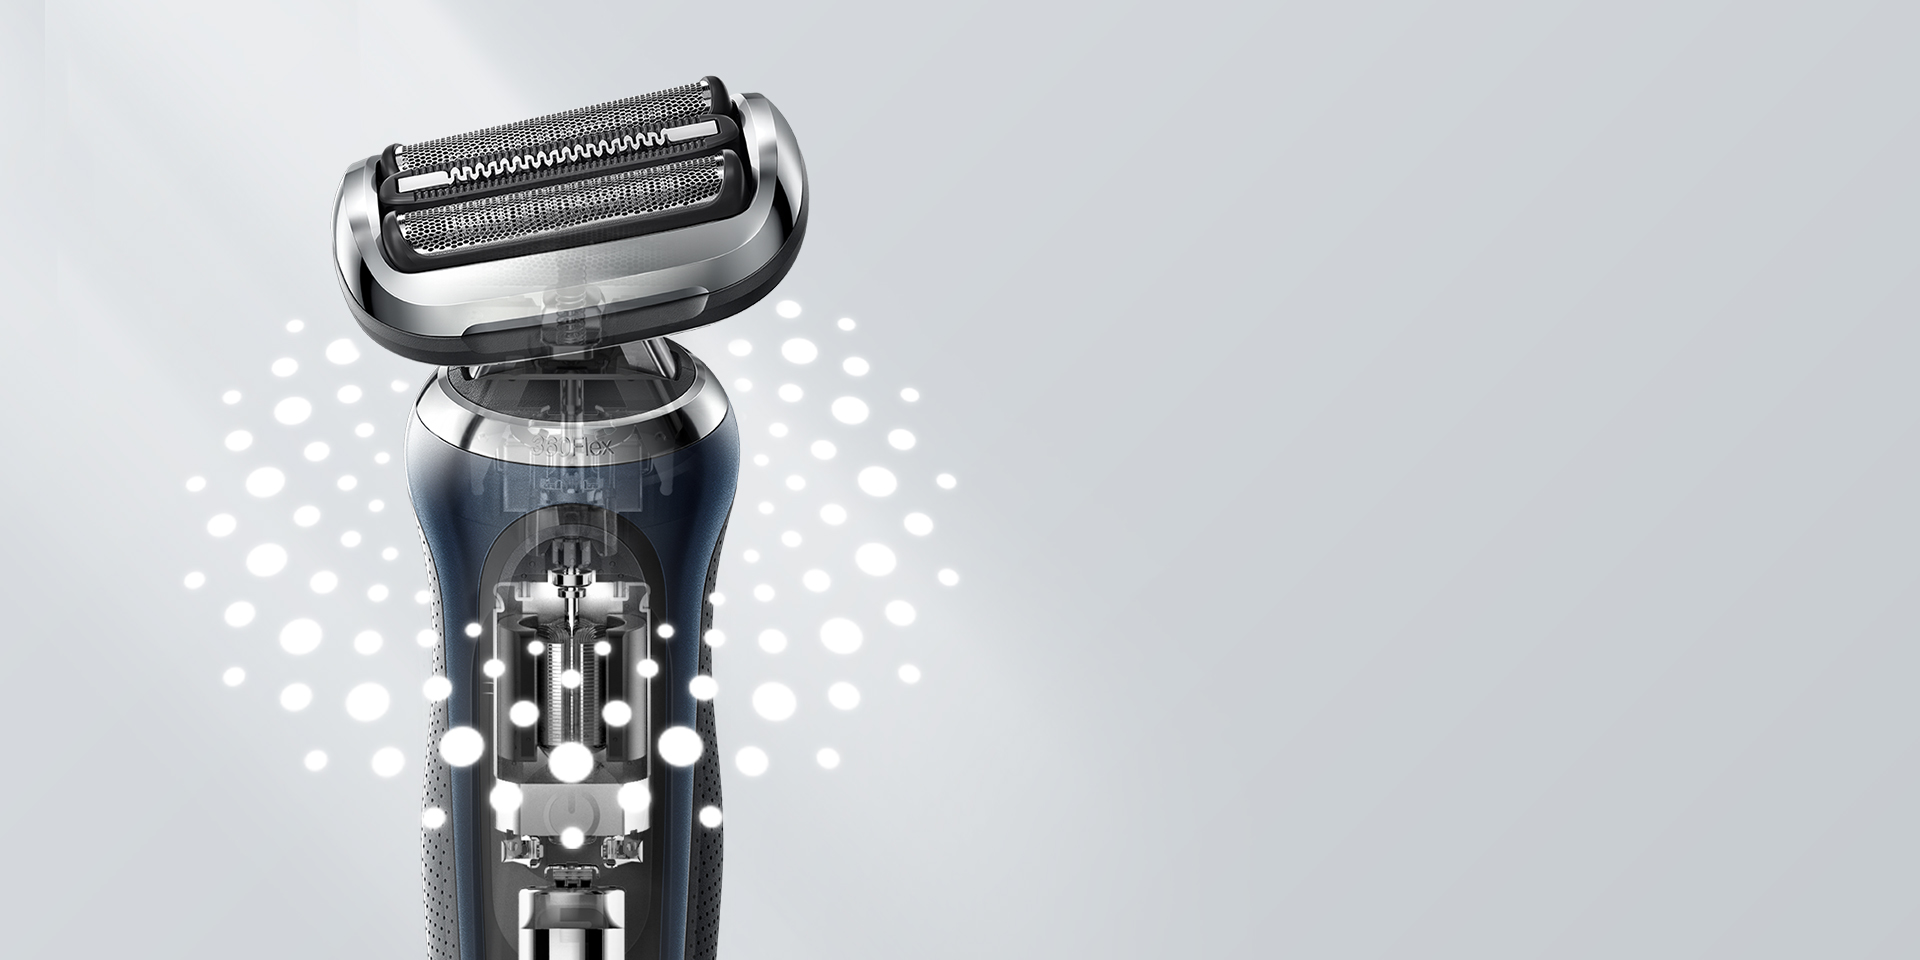 Series 7 71-B7850cc Shaver for Men, Wet & Dry with 360° Flex Head